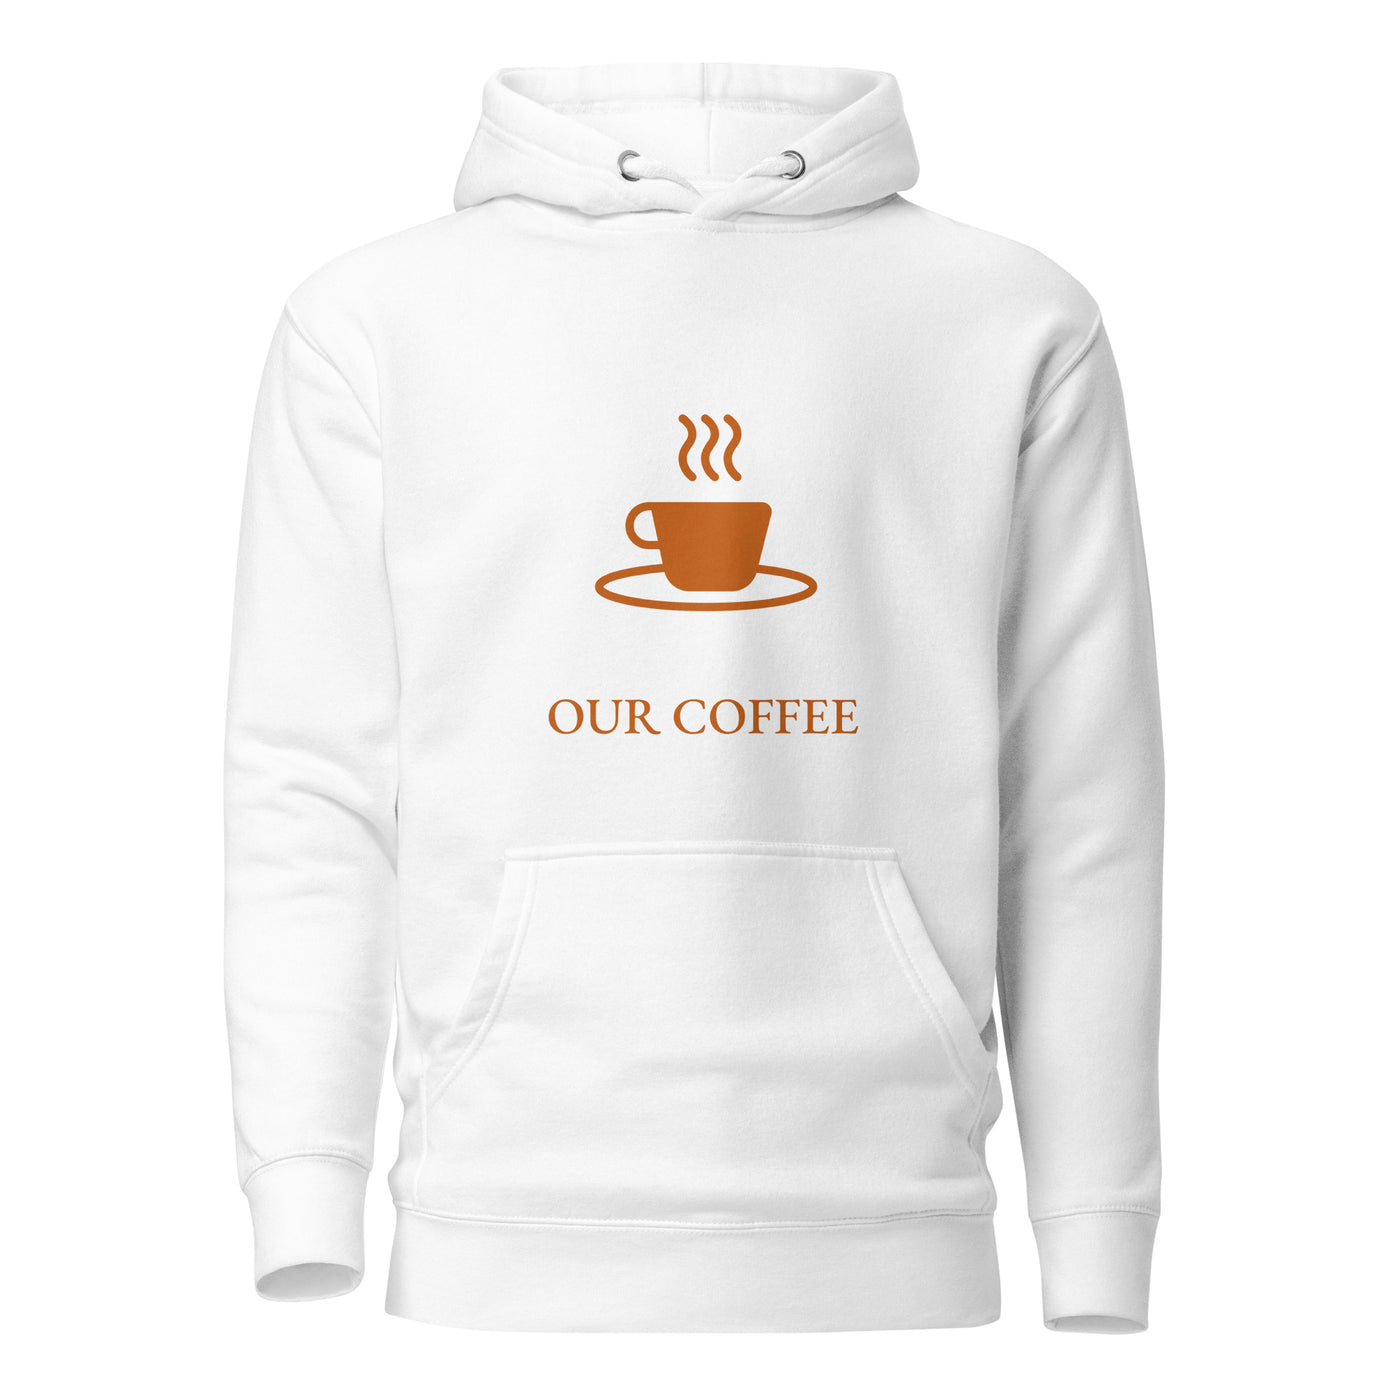 In cryptography, we trust... our coffee (Orange Text) - Unisex Hoodie